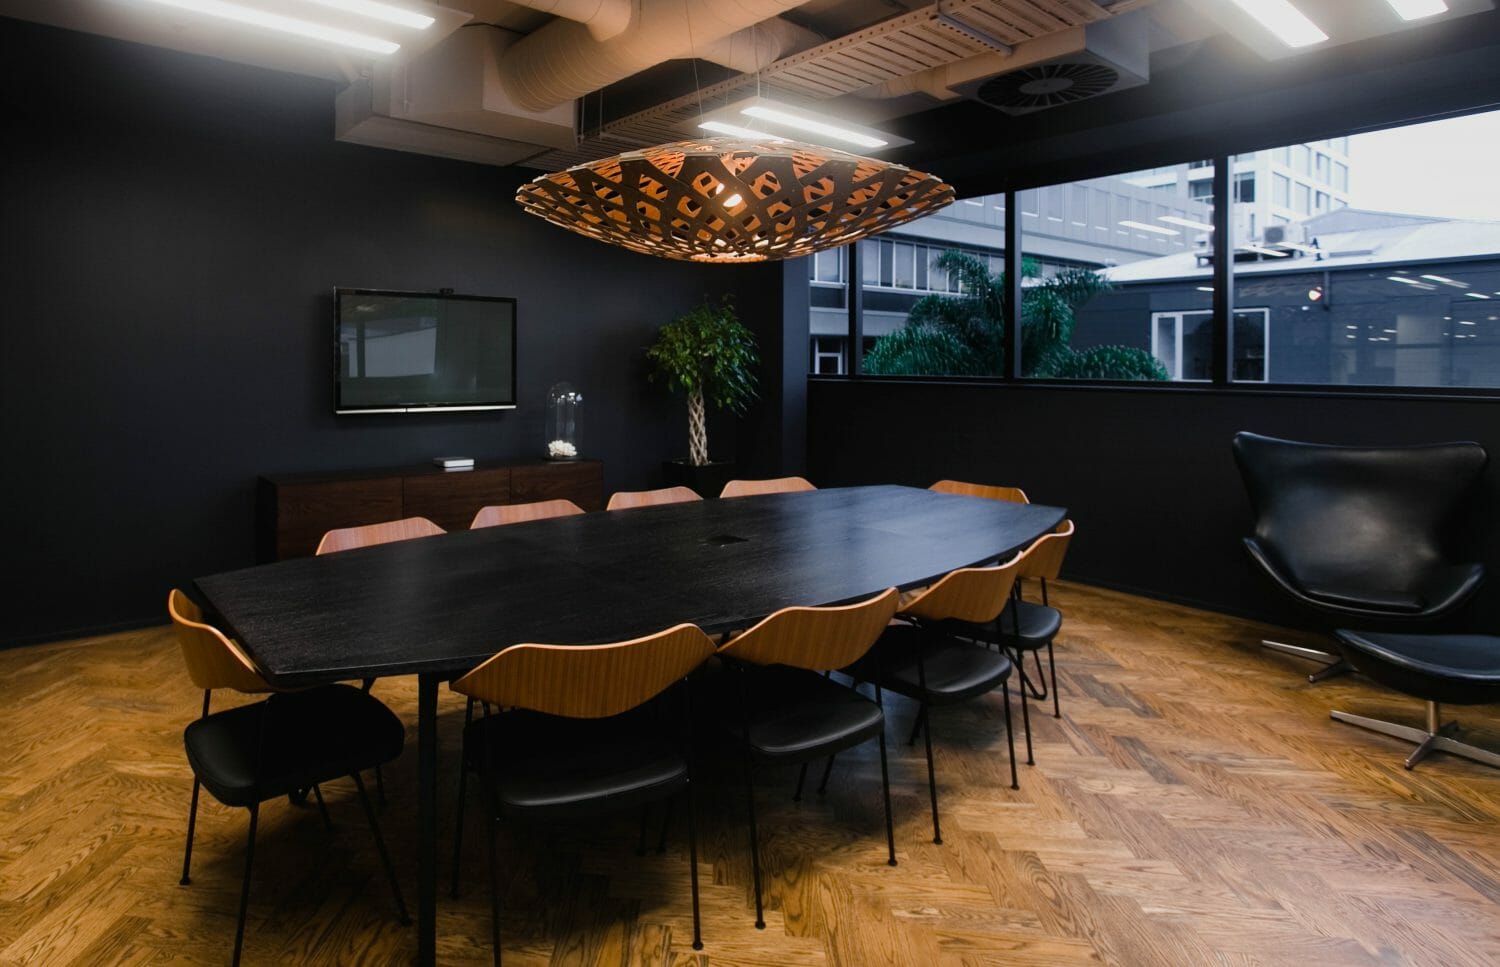 Meeting Room Design for Pie Funds